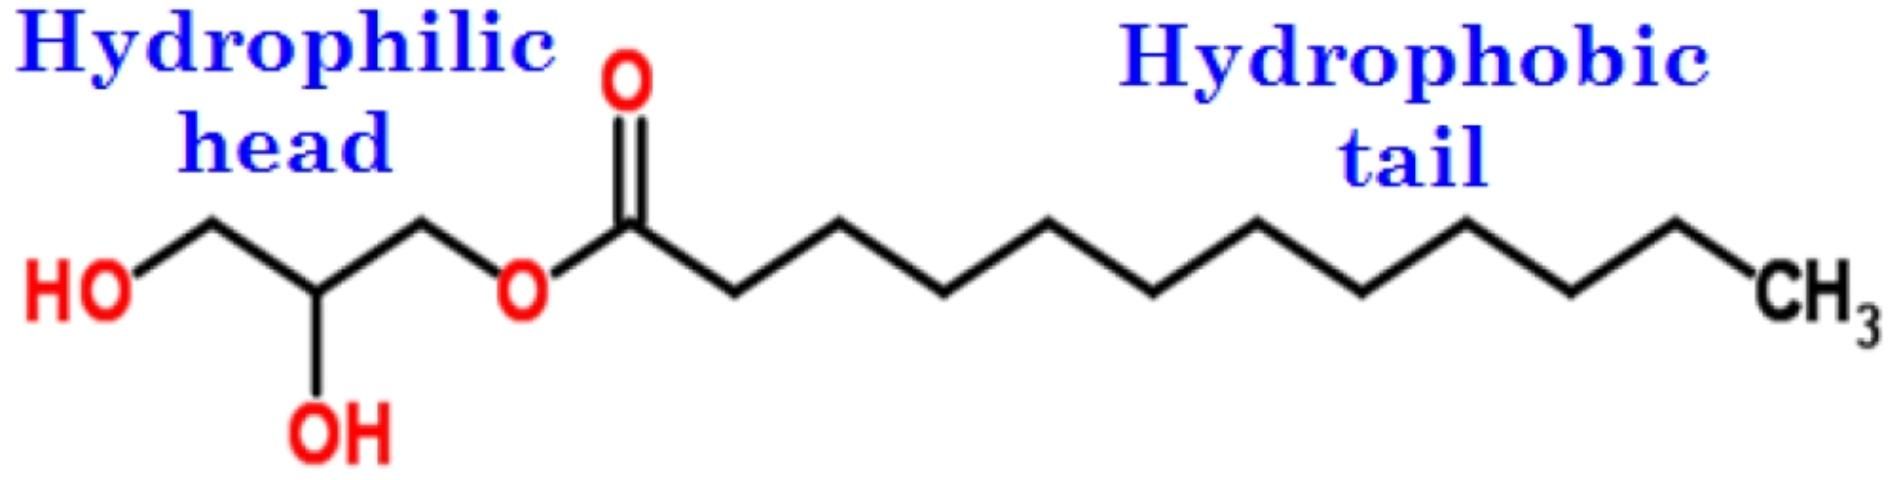 Figure 6. Chemical structure of a nonionic surfactant, monolaurin, also known as glycerol monolaurate. Its chemical formula is C15H30O4. This surfactant has an 11-carbon hydrophobic tail and one non-charged multiple alcohol hydrophilic head.